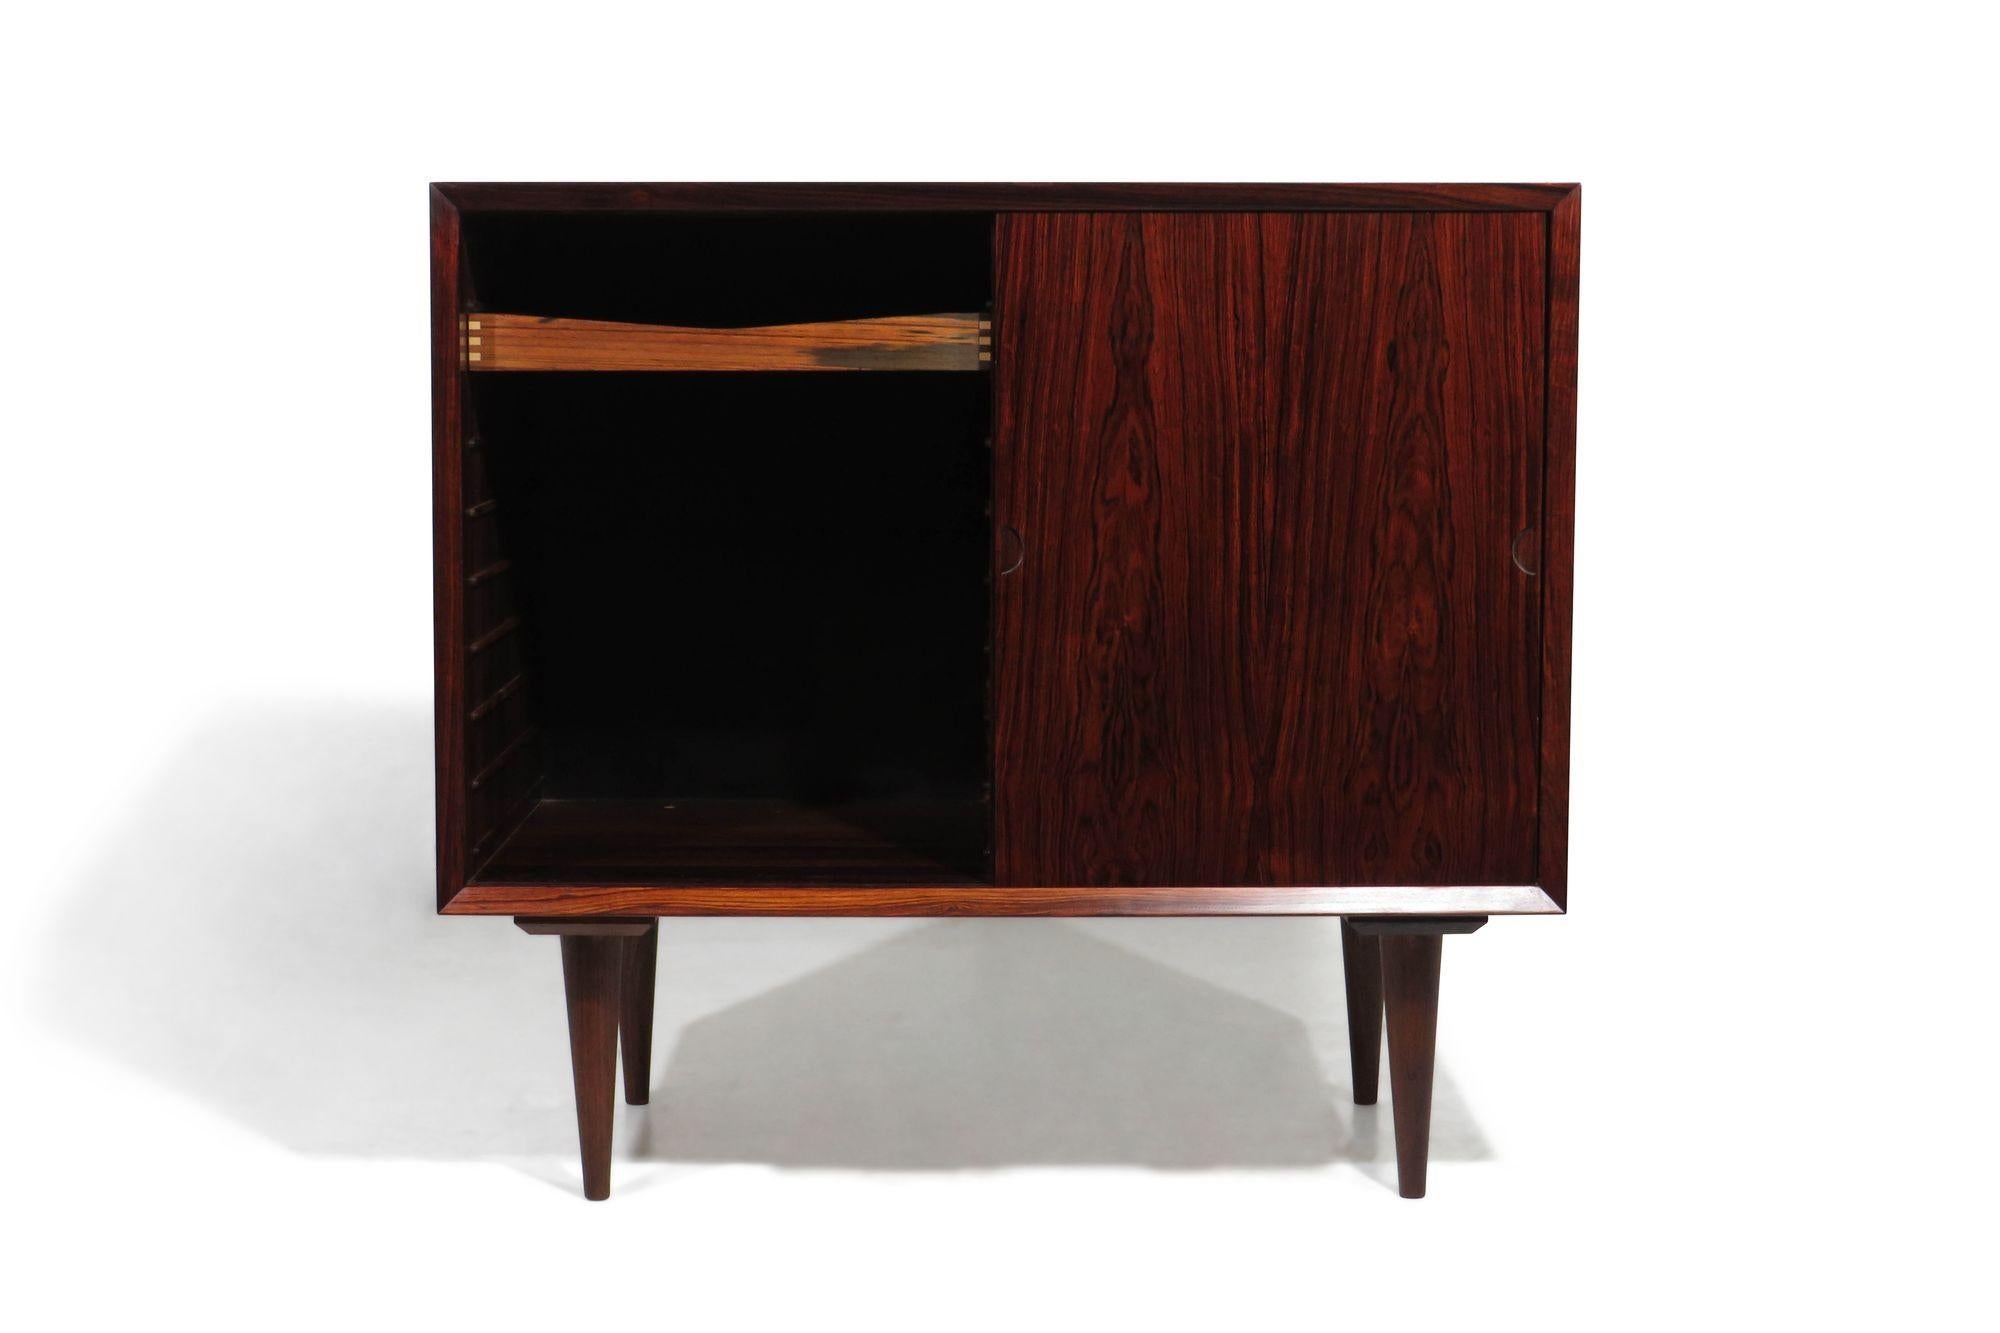 Poul Cadovius Rosewood cabinet with book-matched sliding doors revealing an interior of mahogany with adjustable shelves and small drawer. Minimal design with mitered corners and hand-carved inset pulls. Raised on tapered legs. Perfect as a bedside